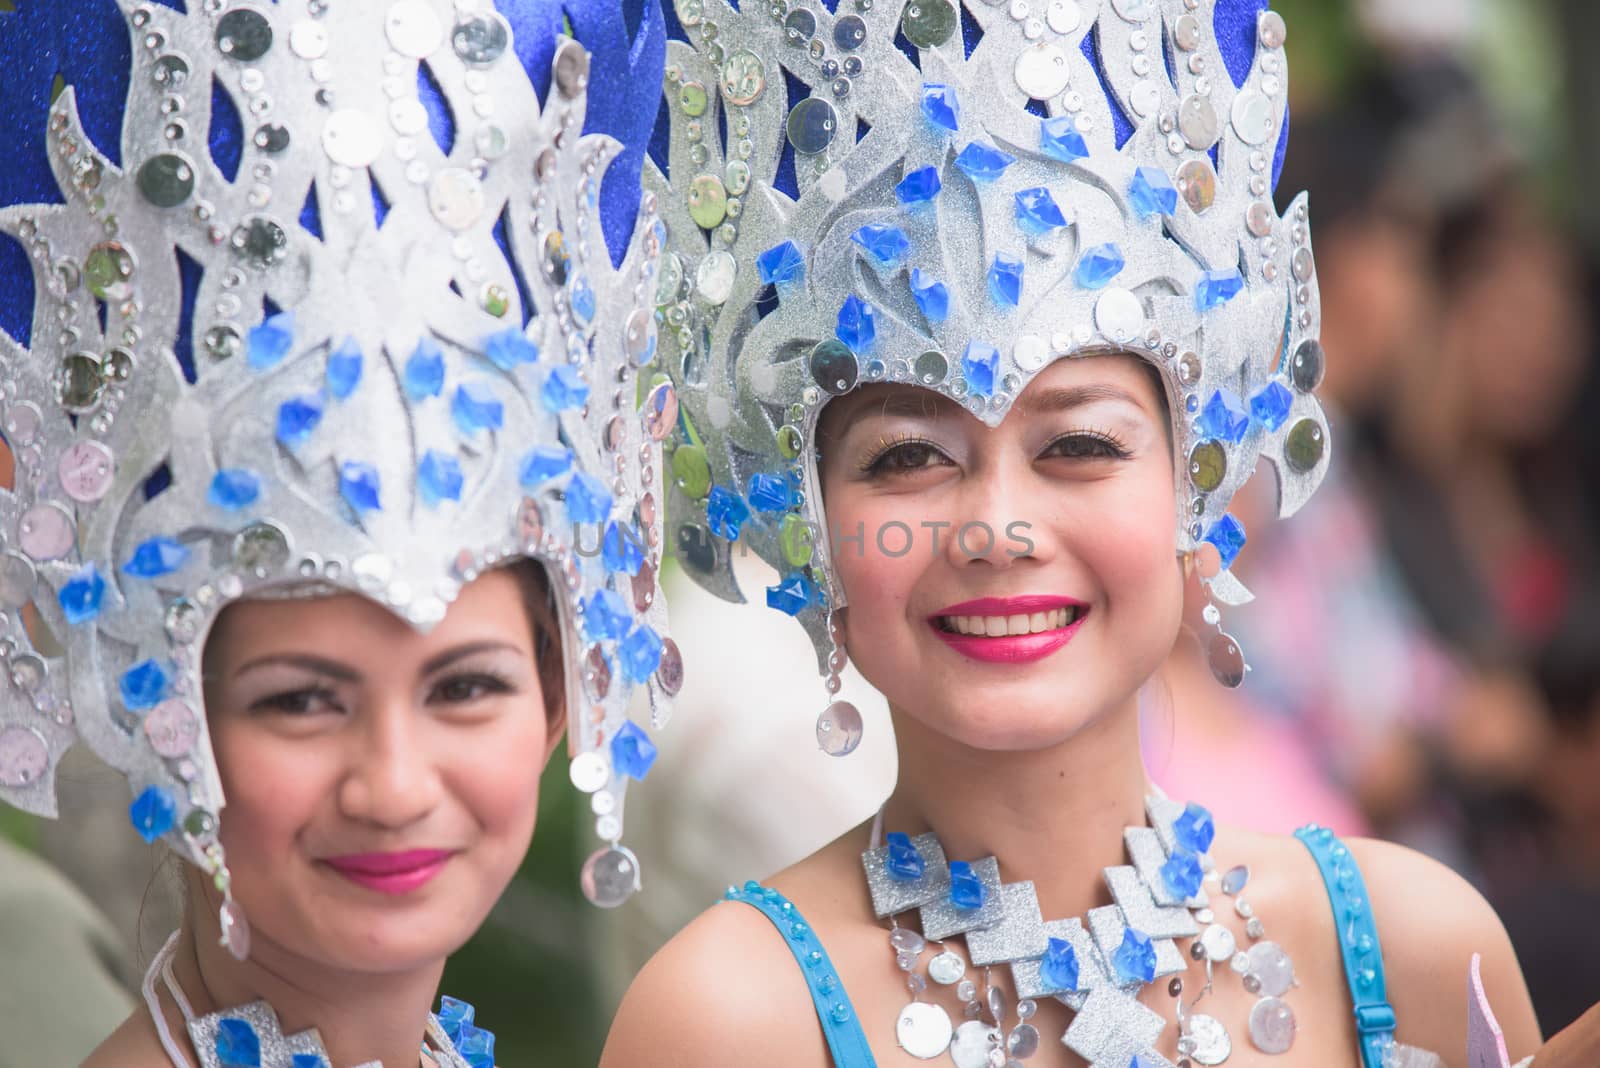 General Santos City, The Philippines - September 1, 2015: Women in costumes on the opening day of the 17th Annual Gensan Tuna Festival to celebrate the  most important industry of city, the tuna canneries.